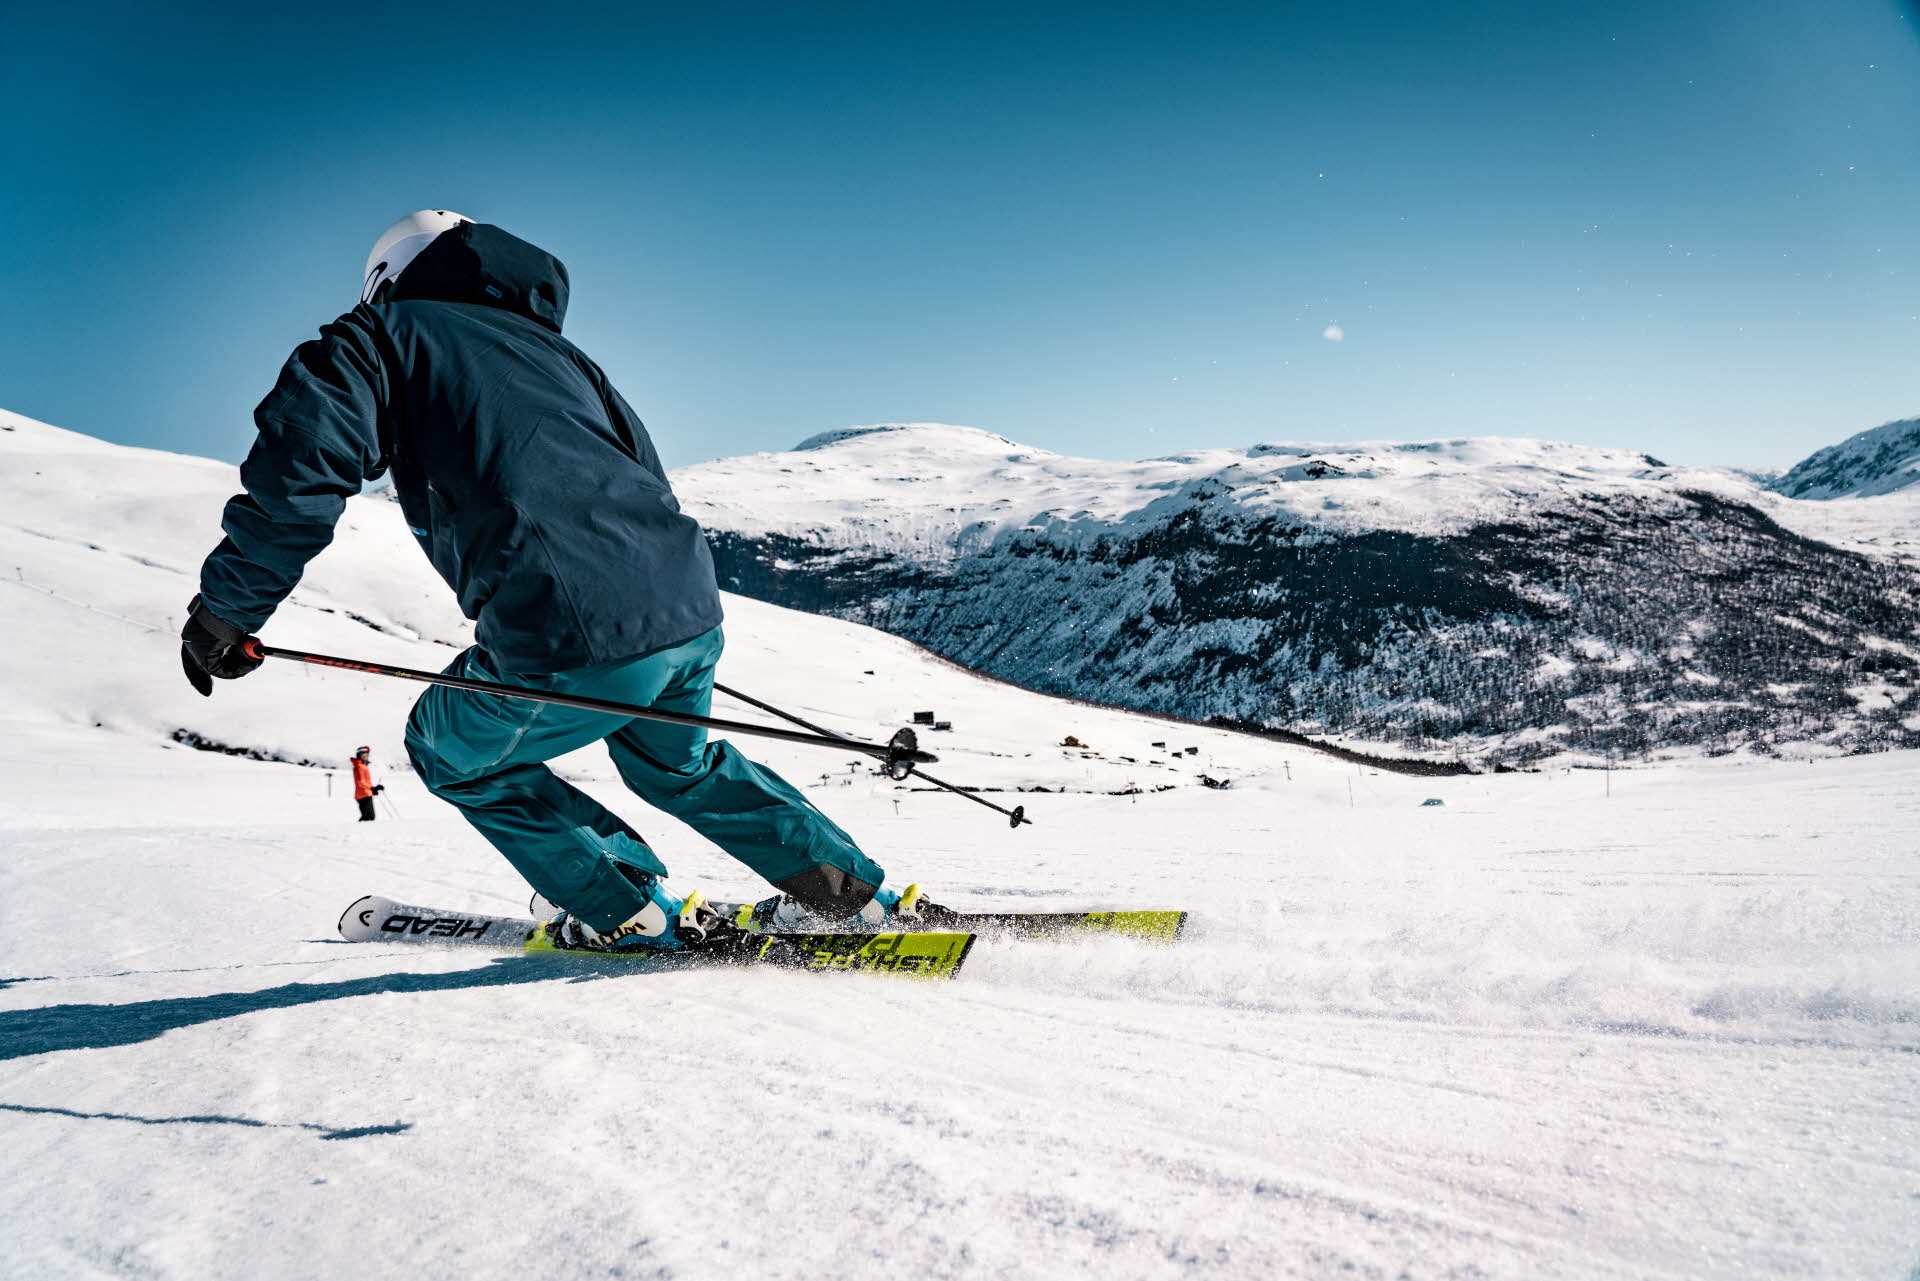 A man dressed in blue carving skiing on the slopes in Myrkdalen